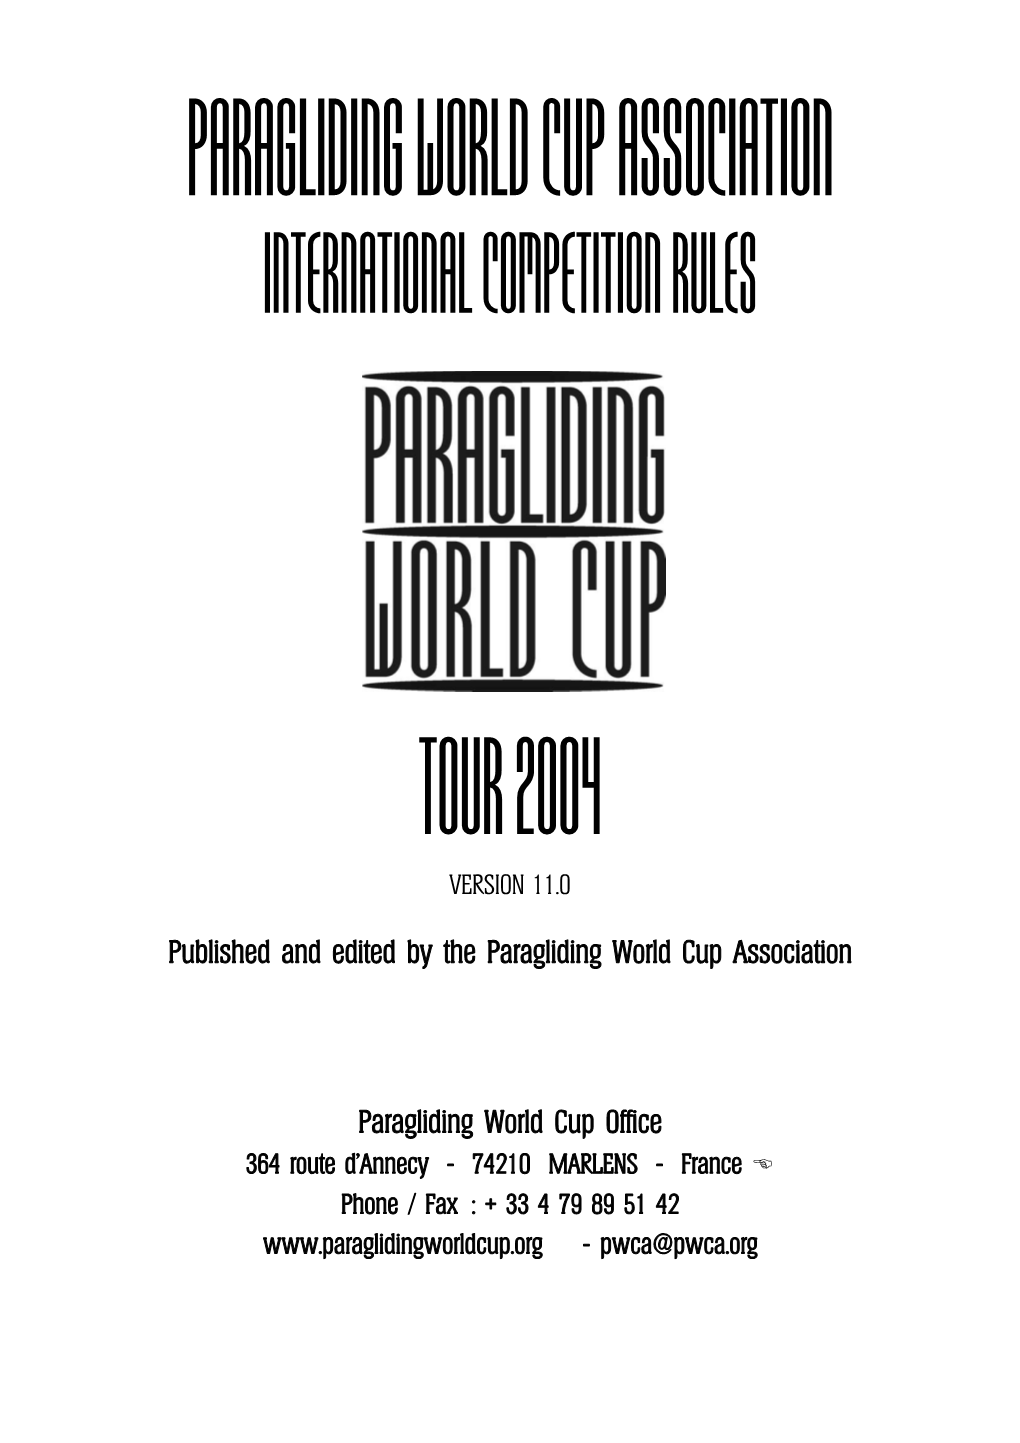 International Competition Rules